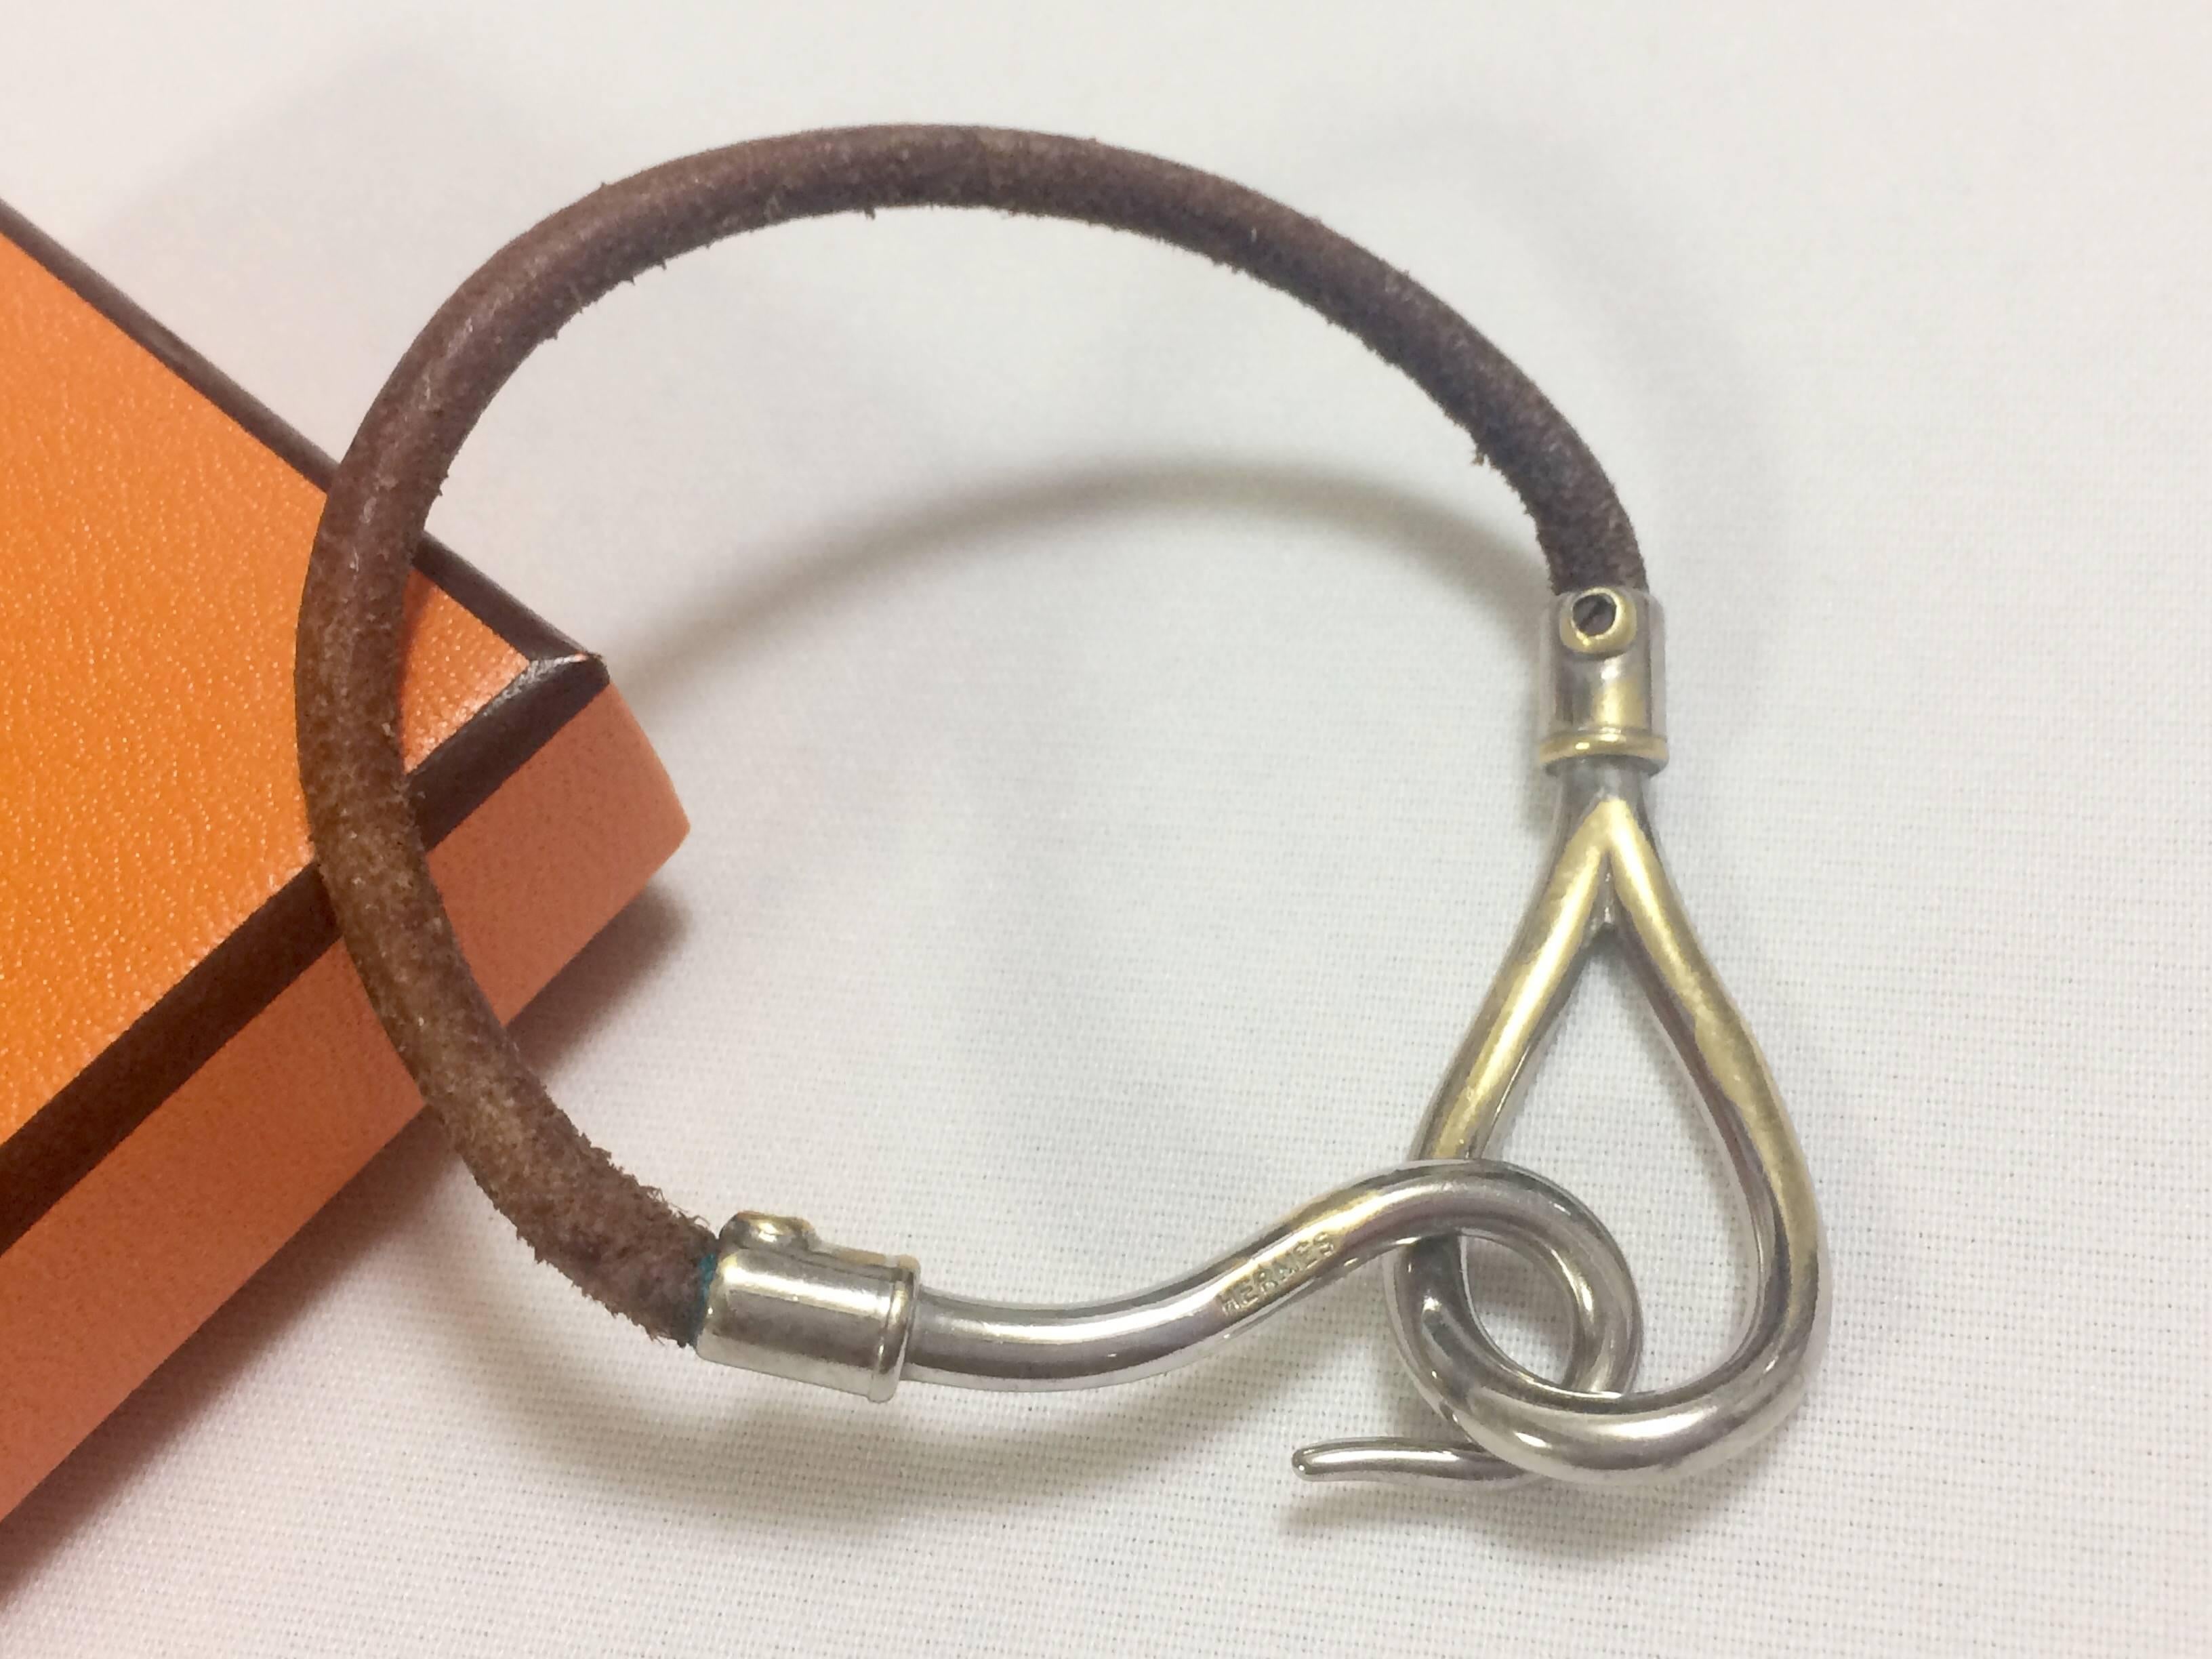 1990s. Vintage Hermes Jumbo leather and silver bracelet. Classic and casual jewelry from Hermes. Comes with everything you need. Best Gift


Looking classic but casual....Introducing one of the most classic and popular jewelries from Hermes back in